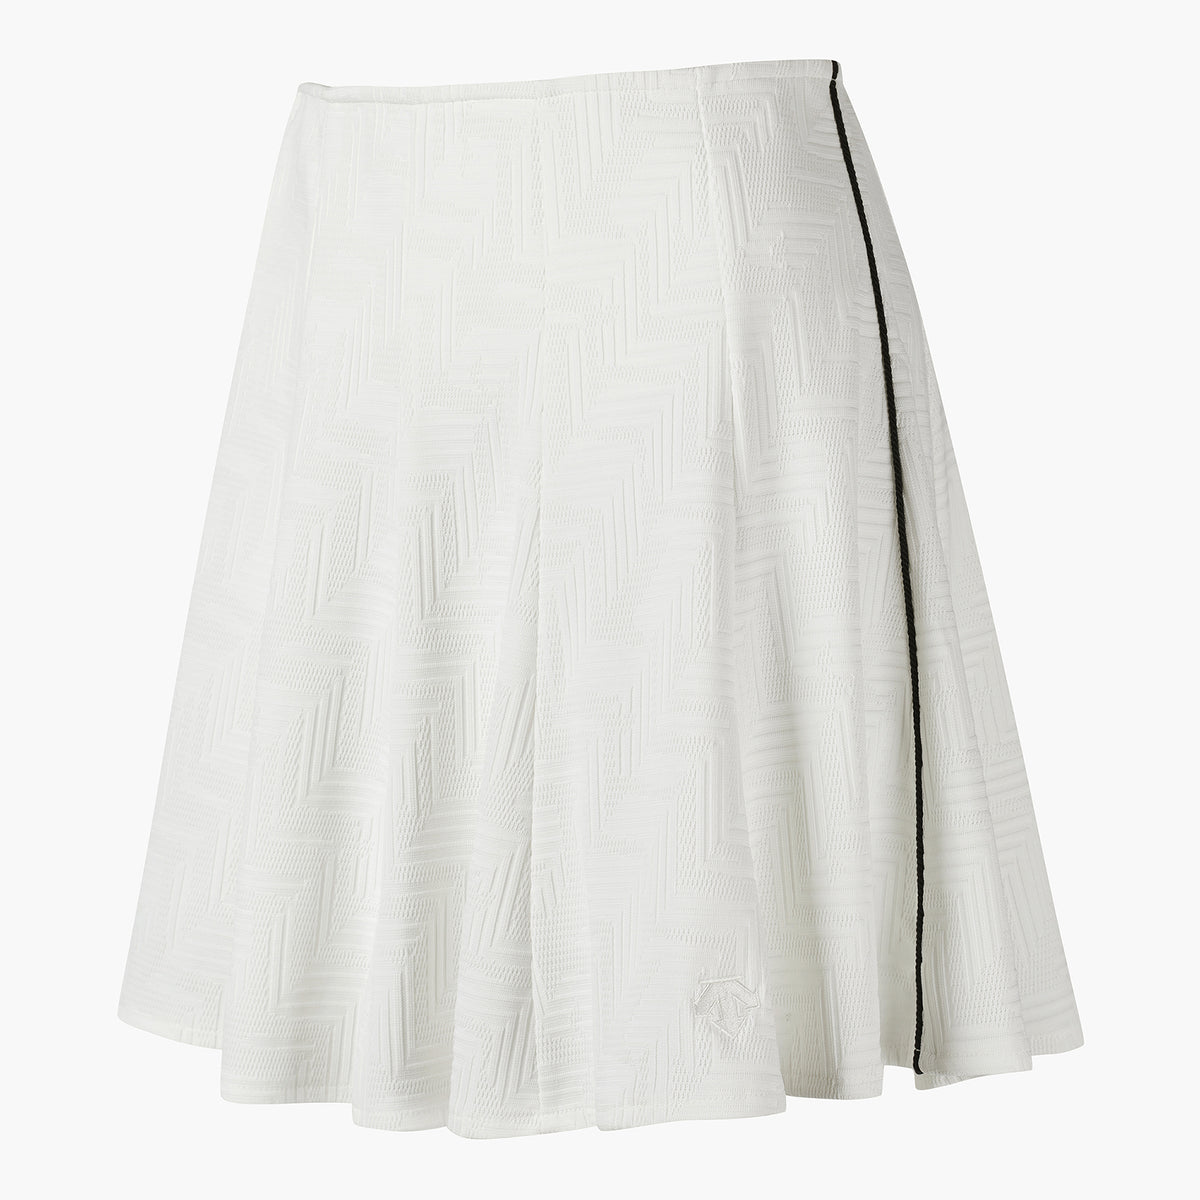 [SP]FRONT PATTERNED PLEATS SKIRT 女士 高爾夫短裙